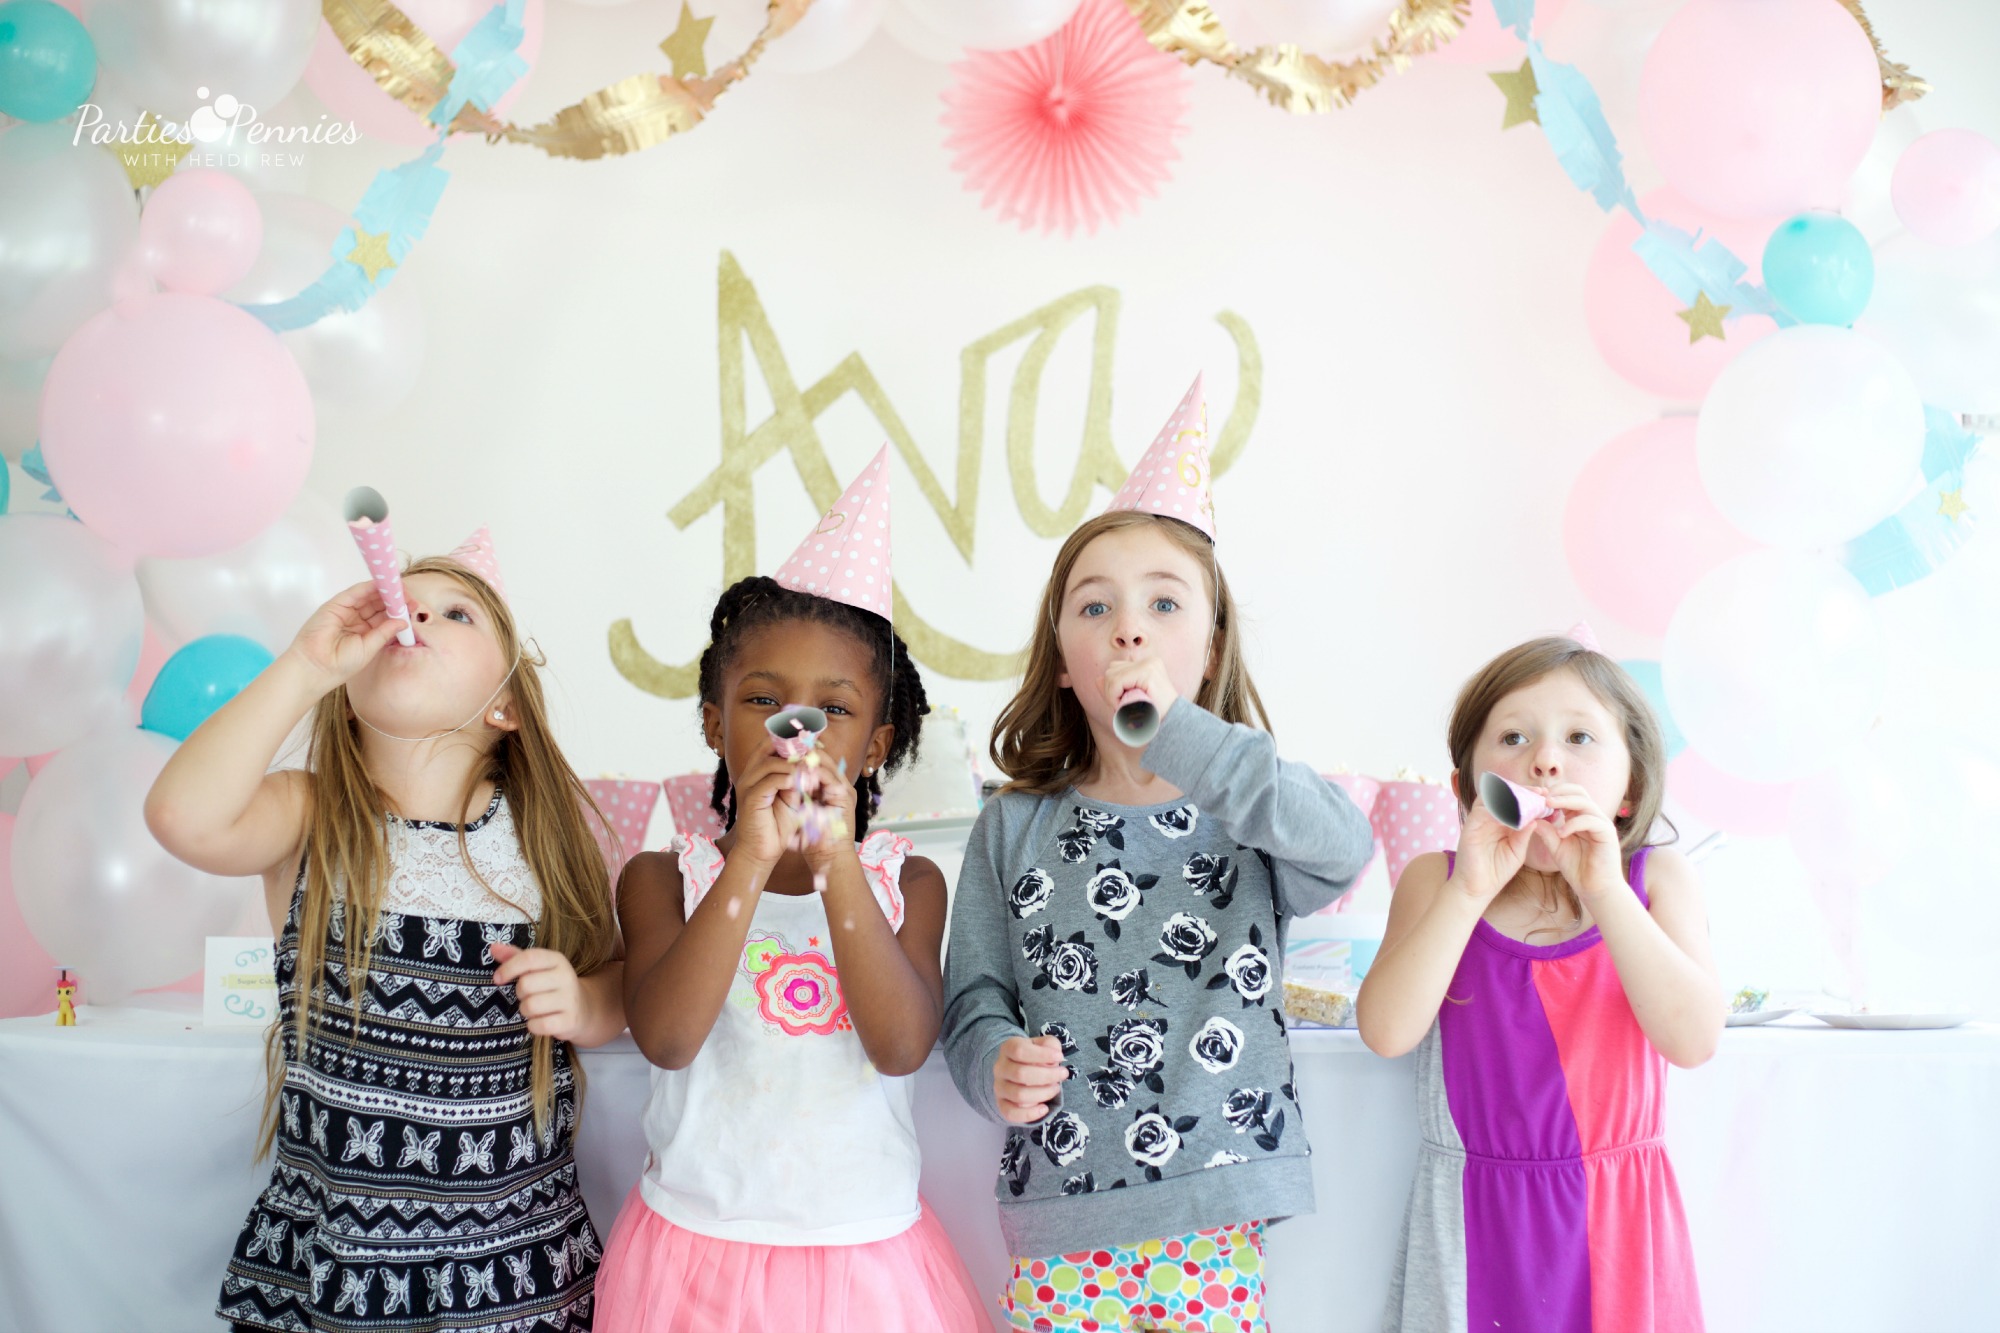 How to throw a PONY PARTY | PartiesforPennies.com | My Little Pony | Pinkie Pie | Girl Birthday Party 